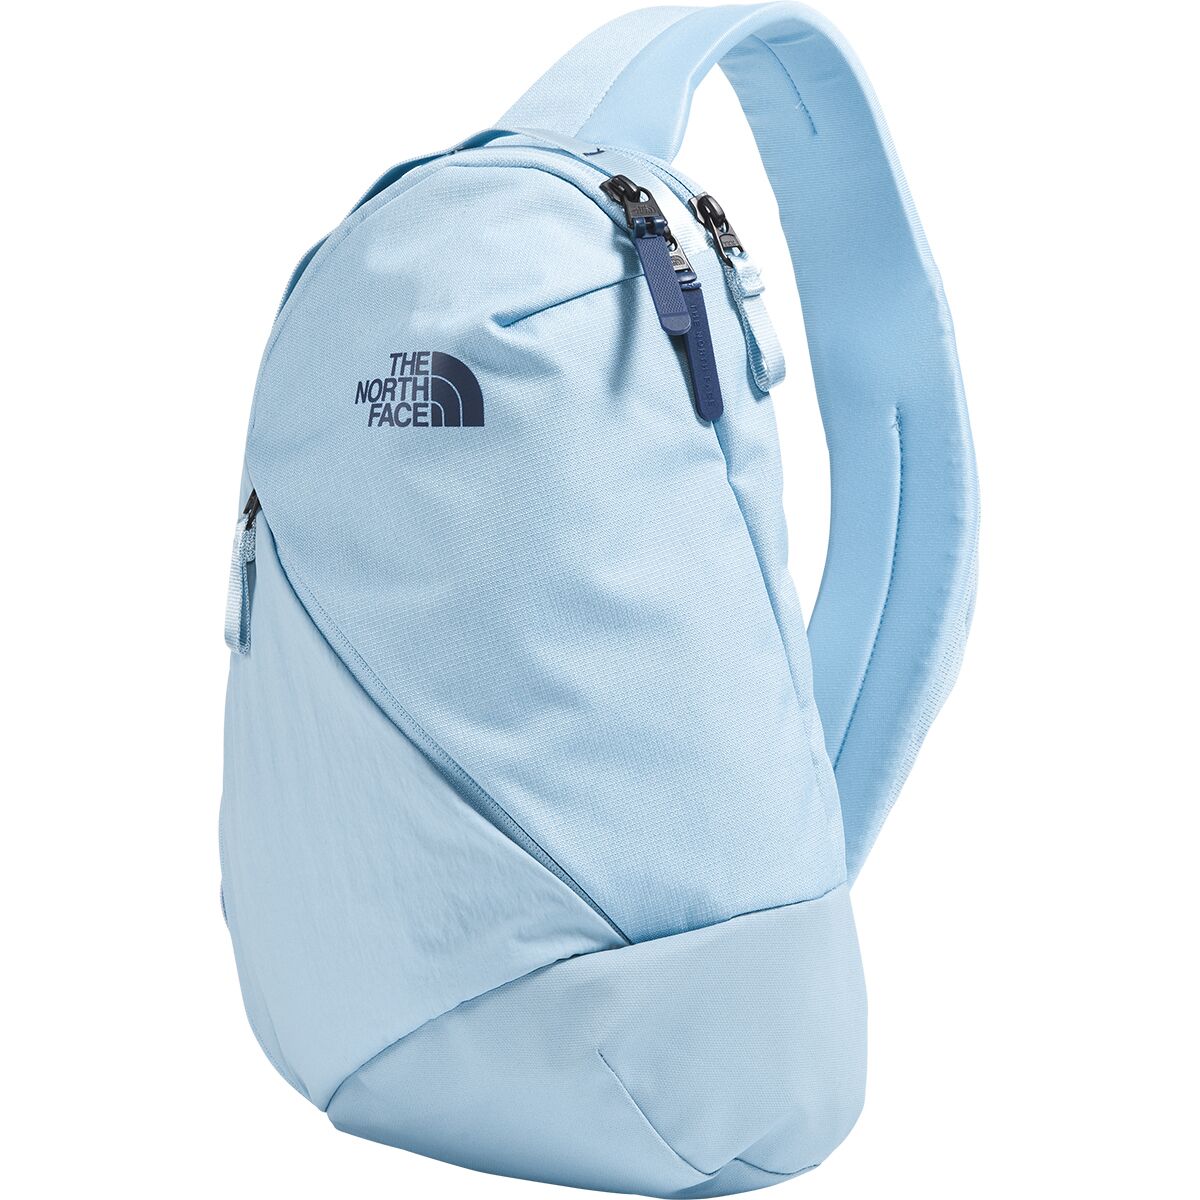 Photos - Backpack The North Face Isabella Sling Bag - Women's 